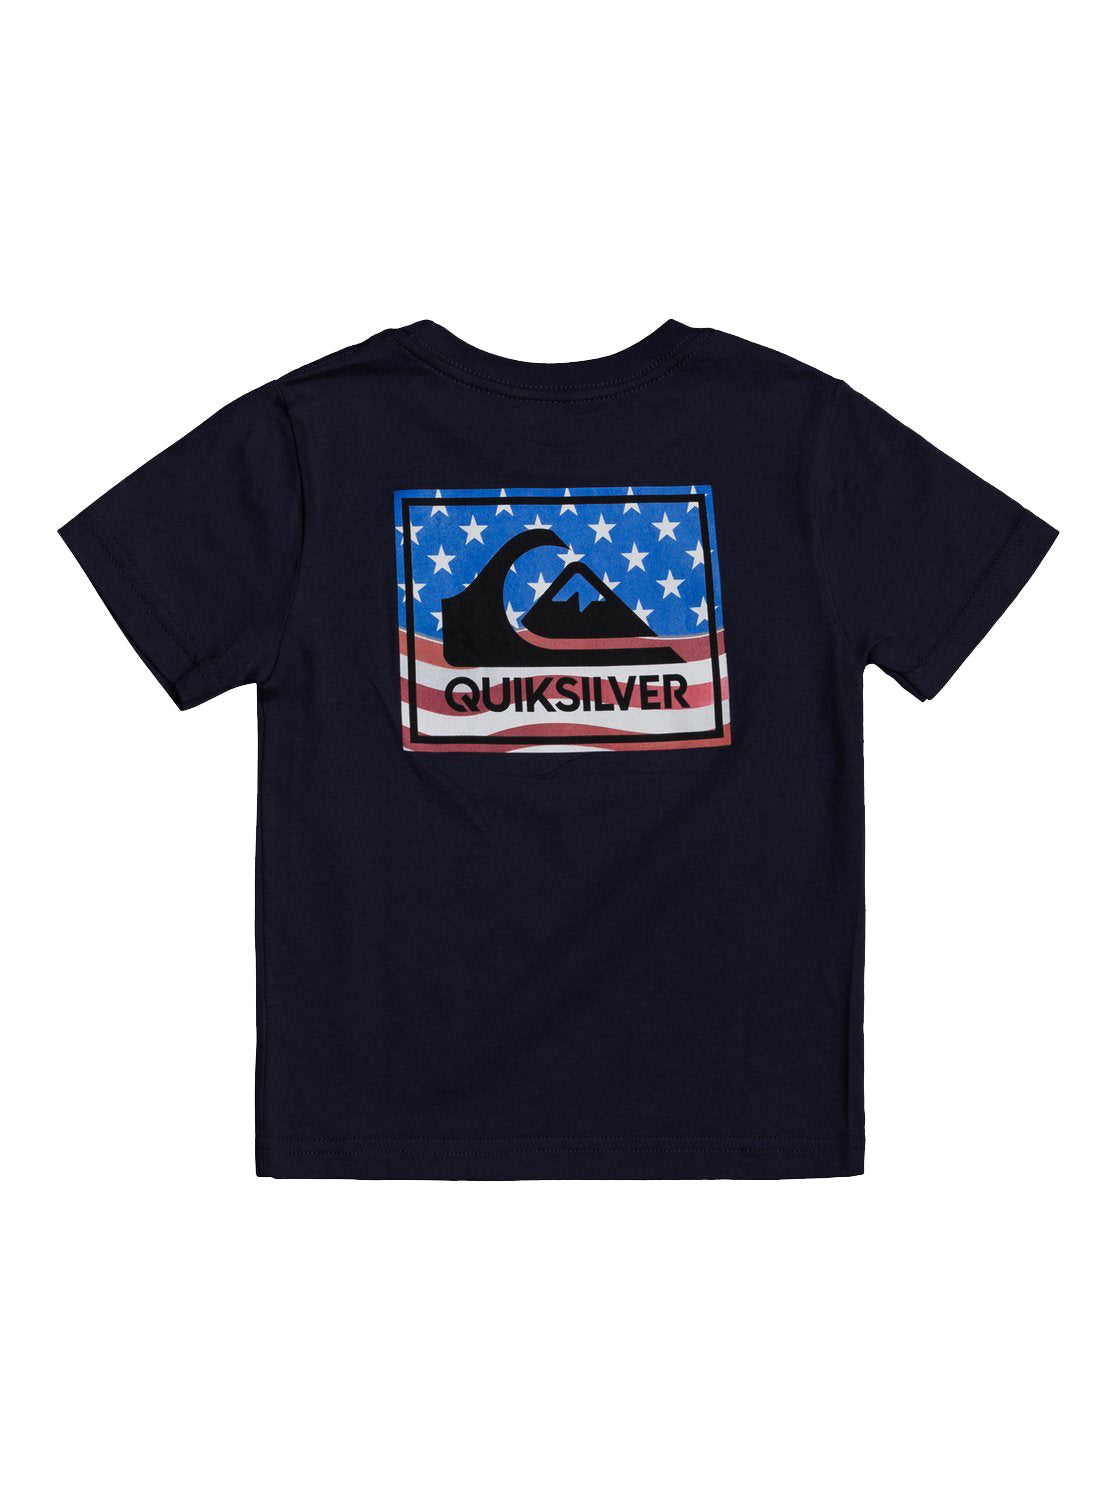 Quiksilver Architexure Youth Tee BYJ0 6